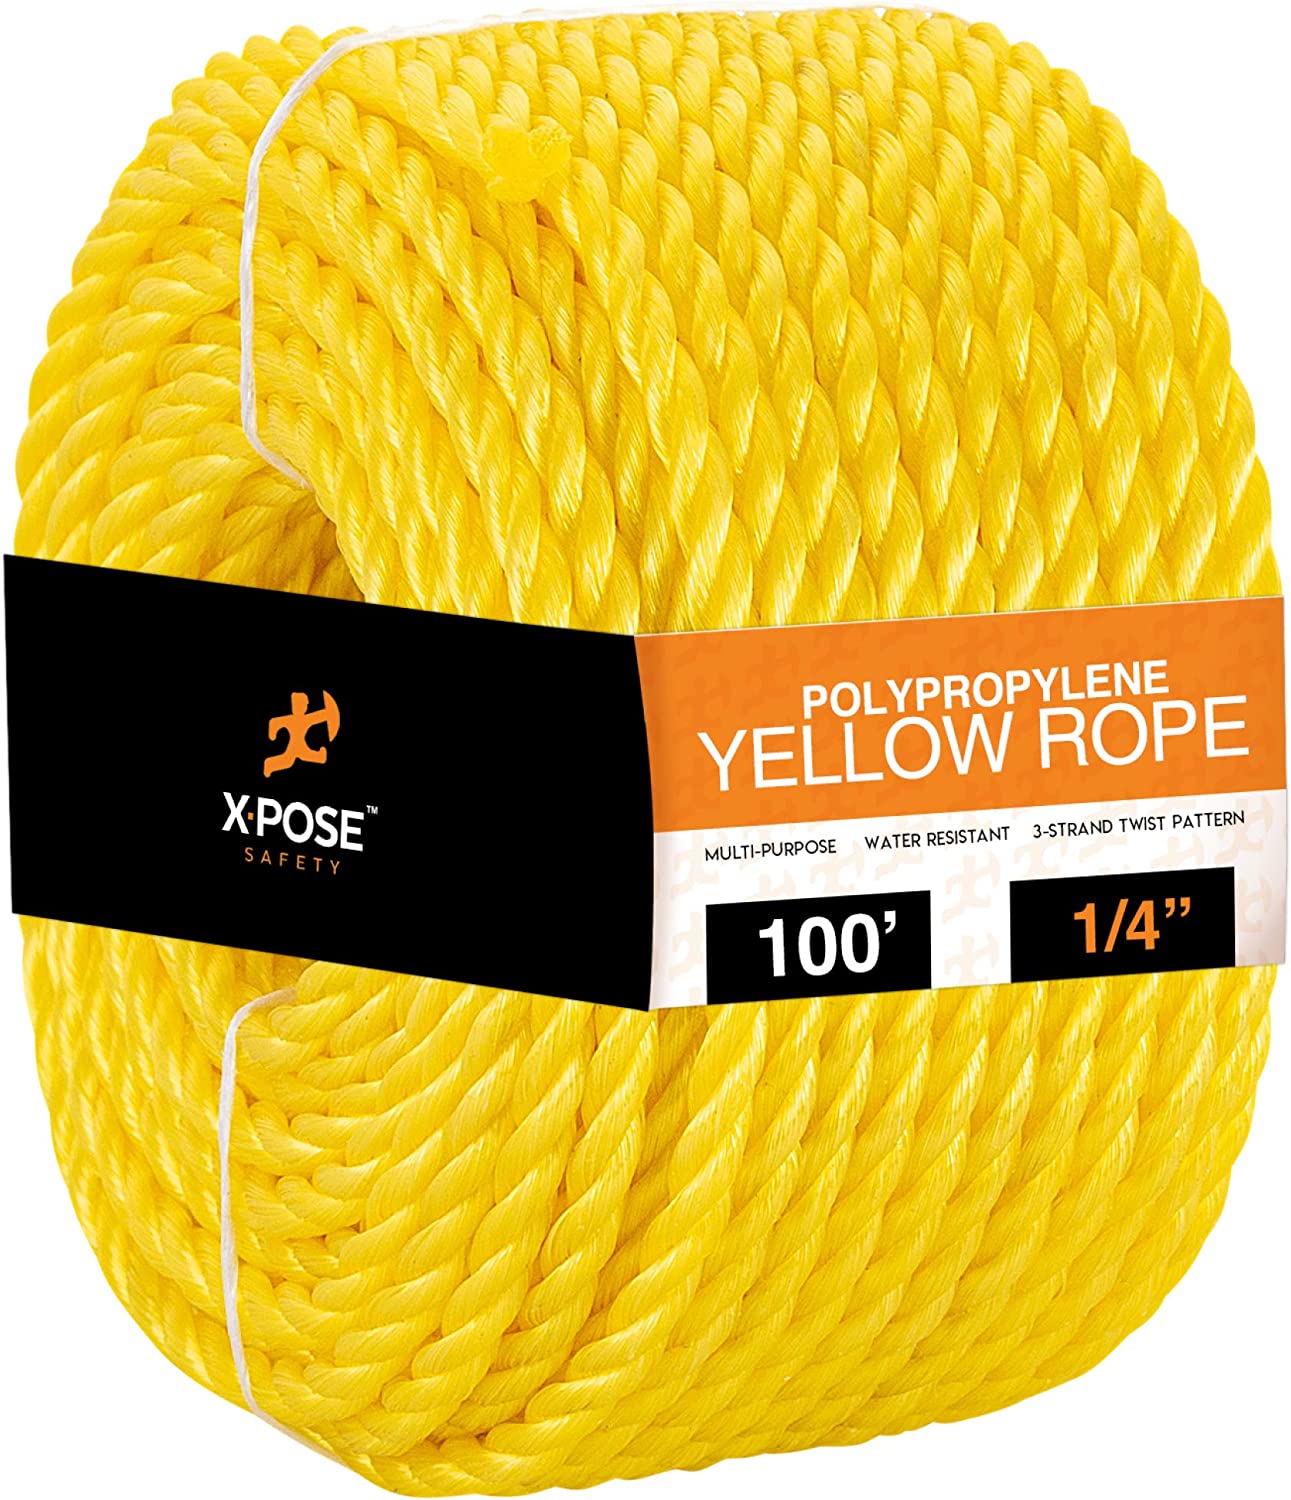 100 ft Twisted Polypropylene Rope – 1/4" – Yellow Floating Poly Pro Cord – Resistant to Oil, Moisture, Marine Growth and Chemicals – Reduced Slip, Easy Knot, Flexible – by Xpose Safety